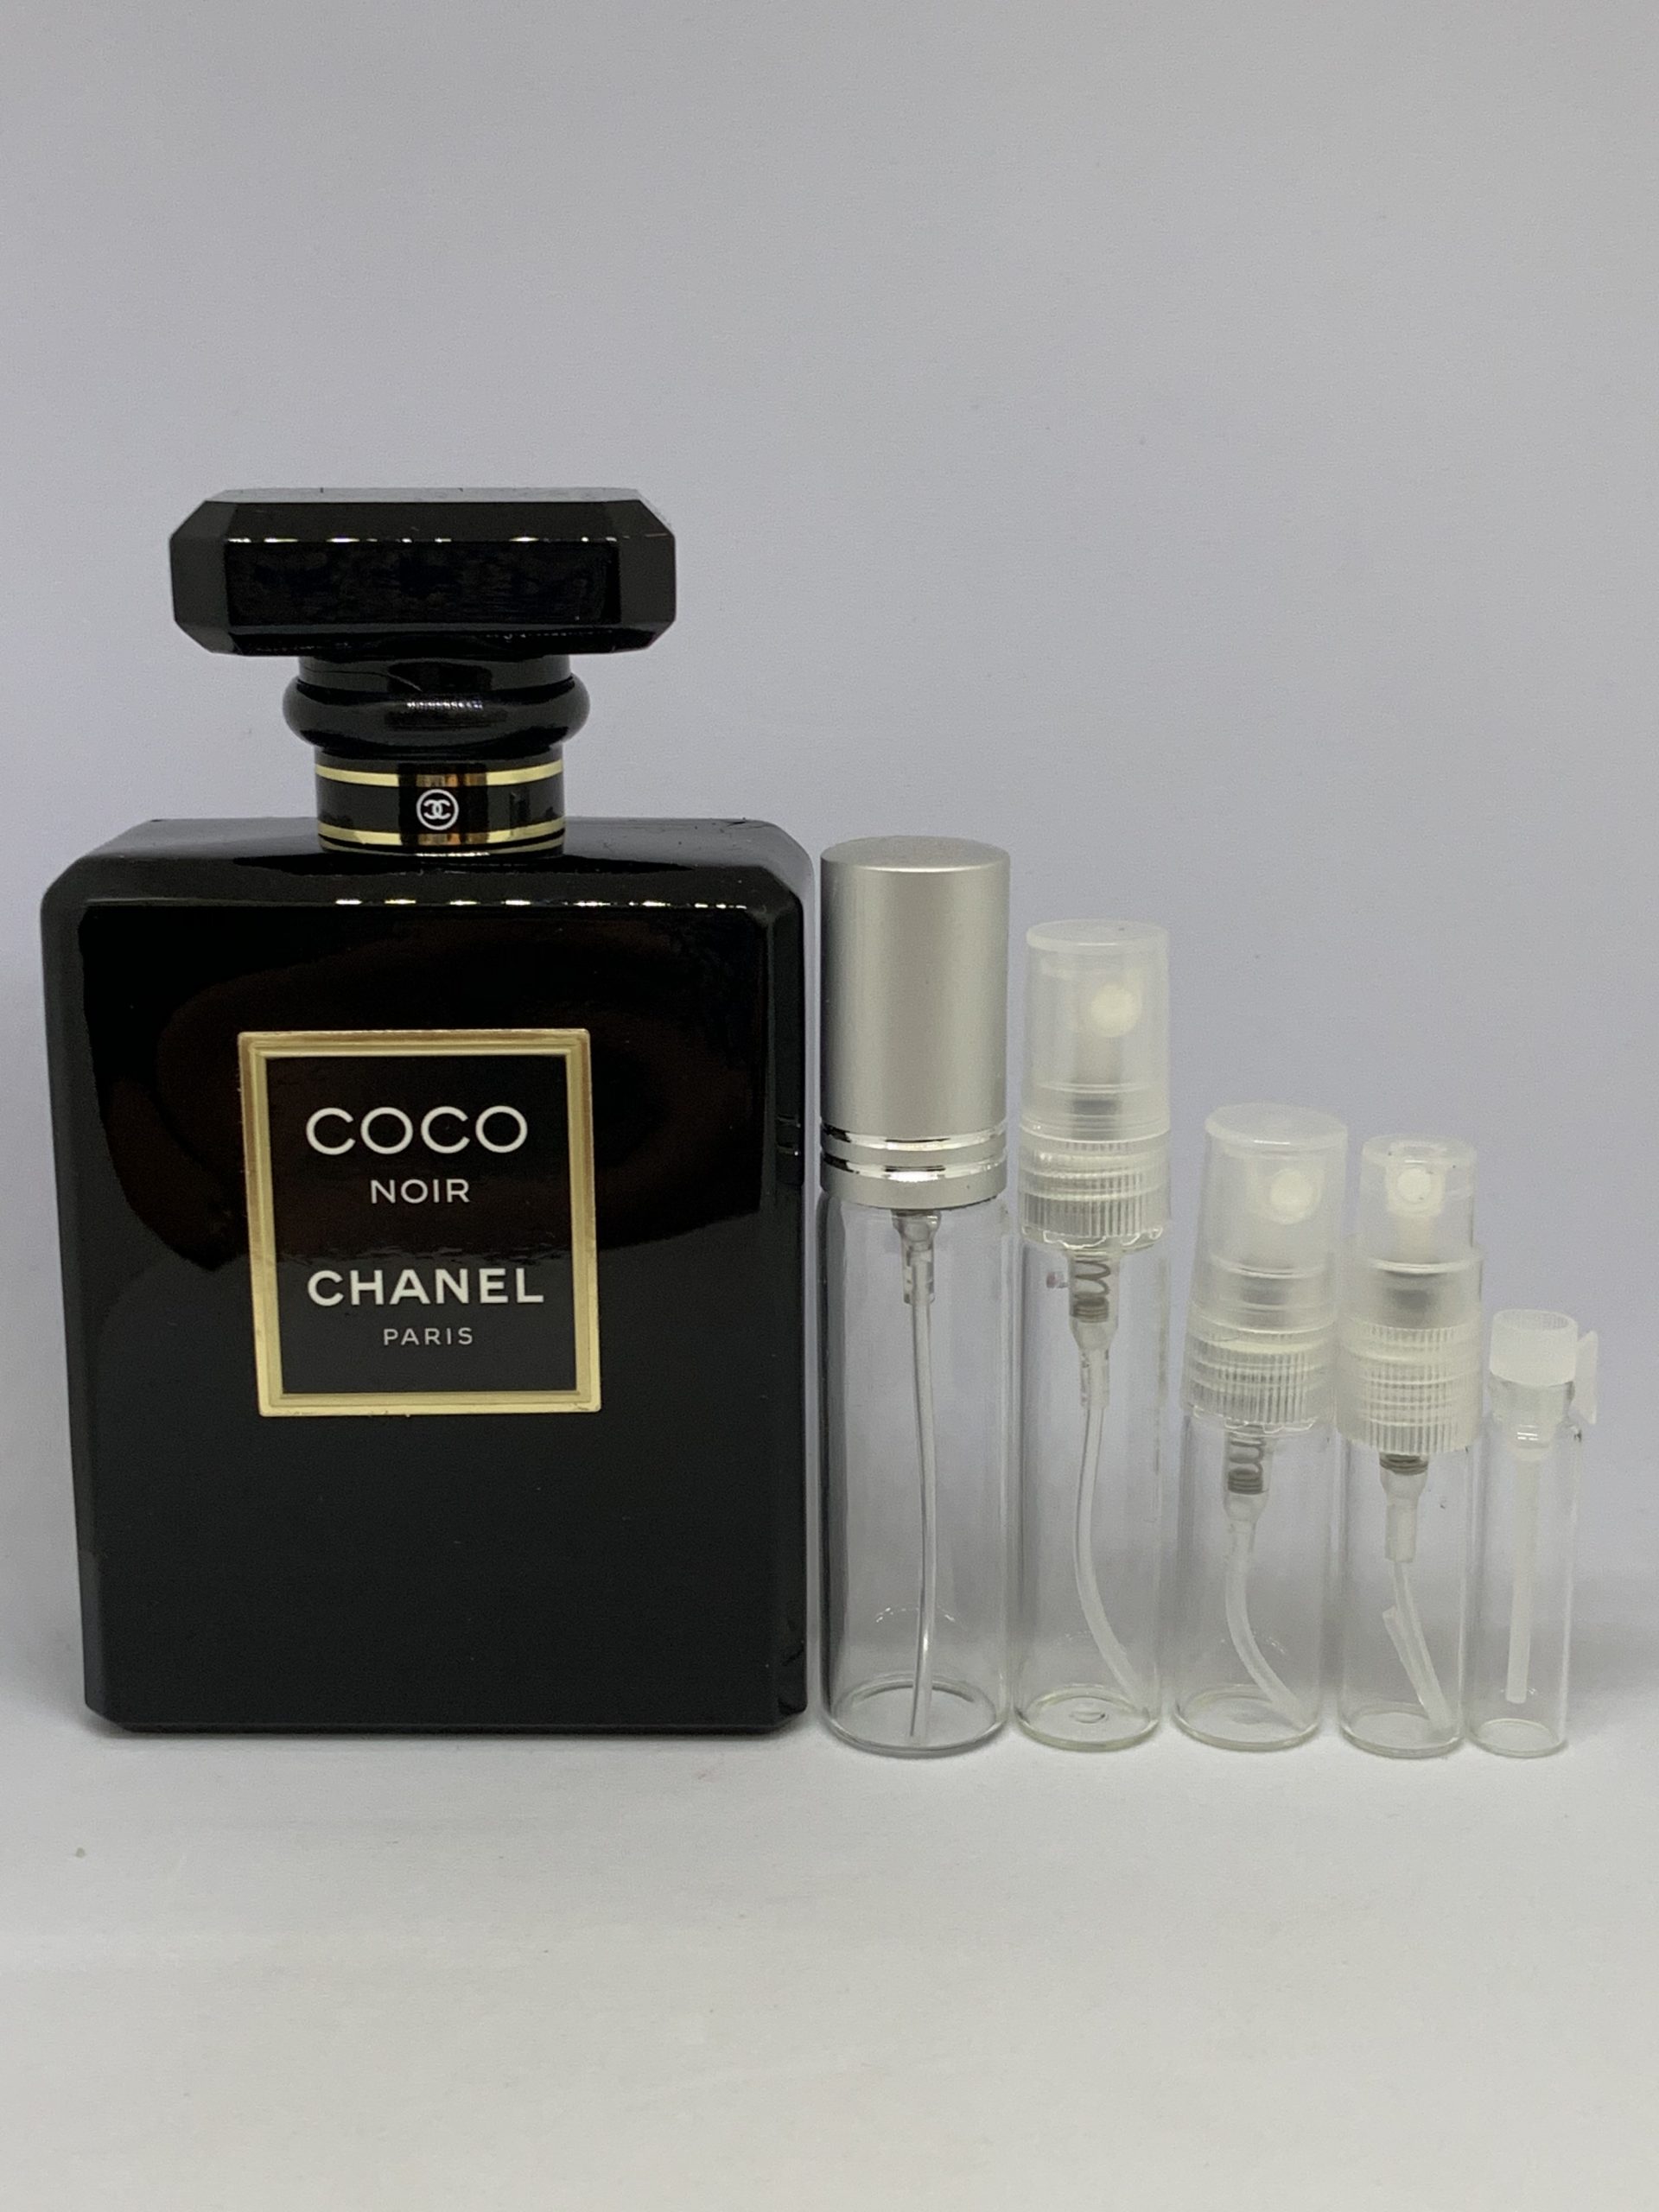 Coco Noir EDP by Chanel - Scent Samples